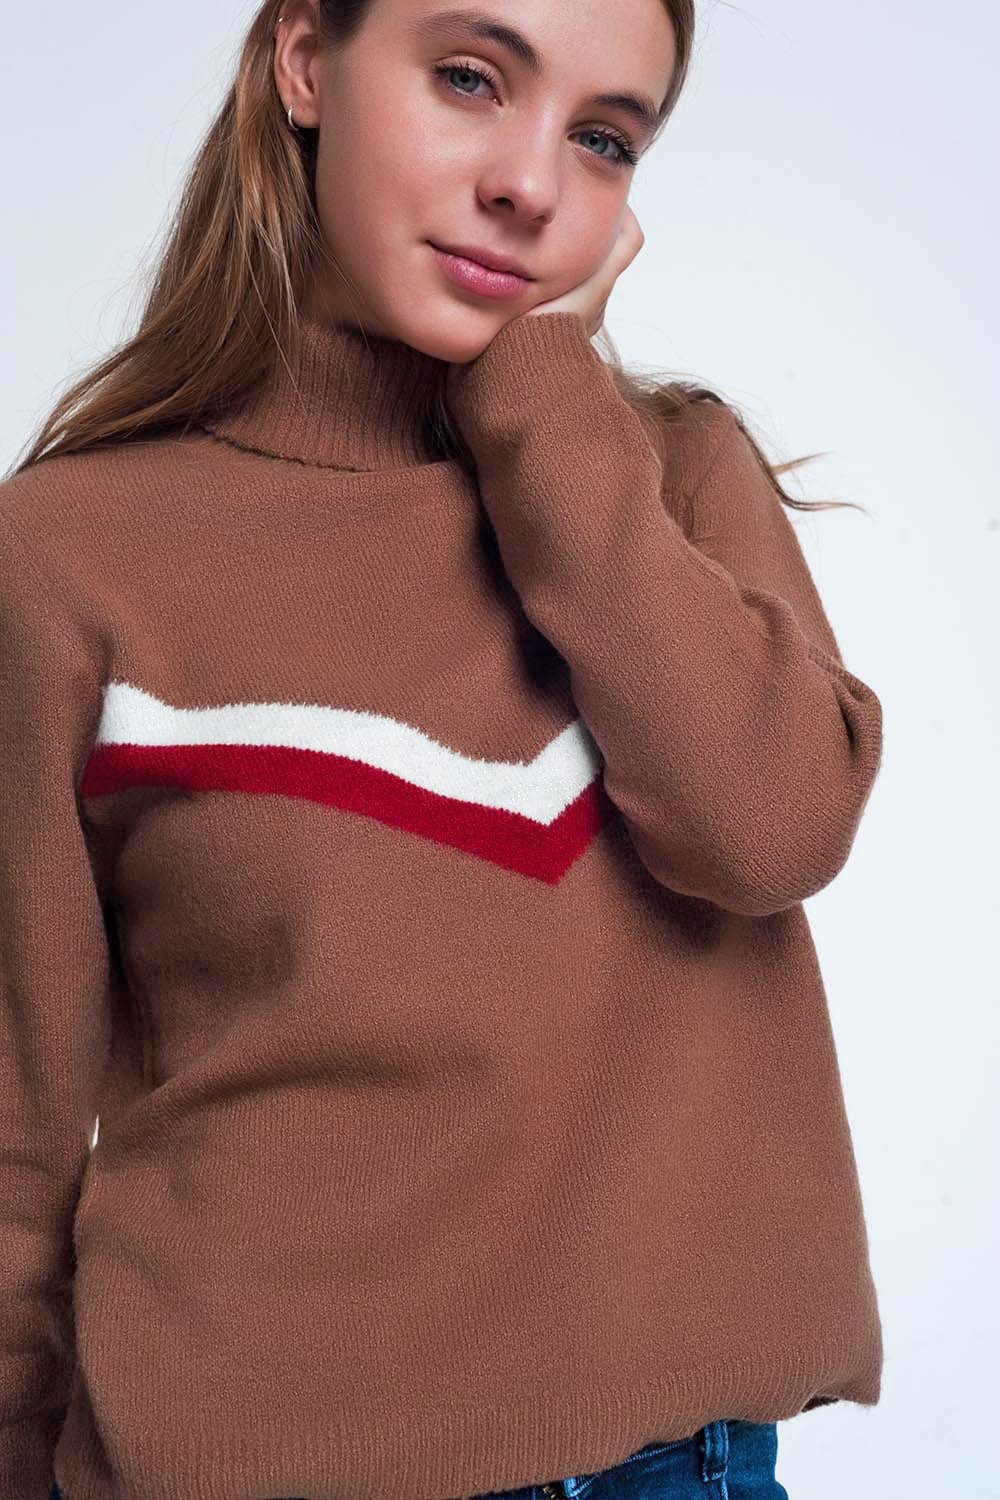 Q2 Women's Sweater Sweater with Chevron Detail in Brown